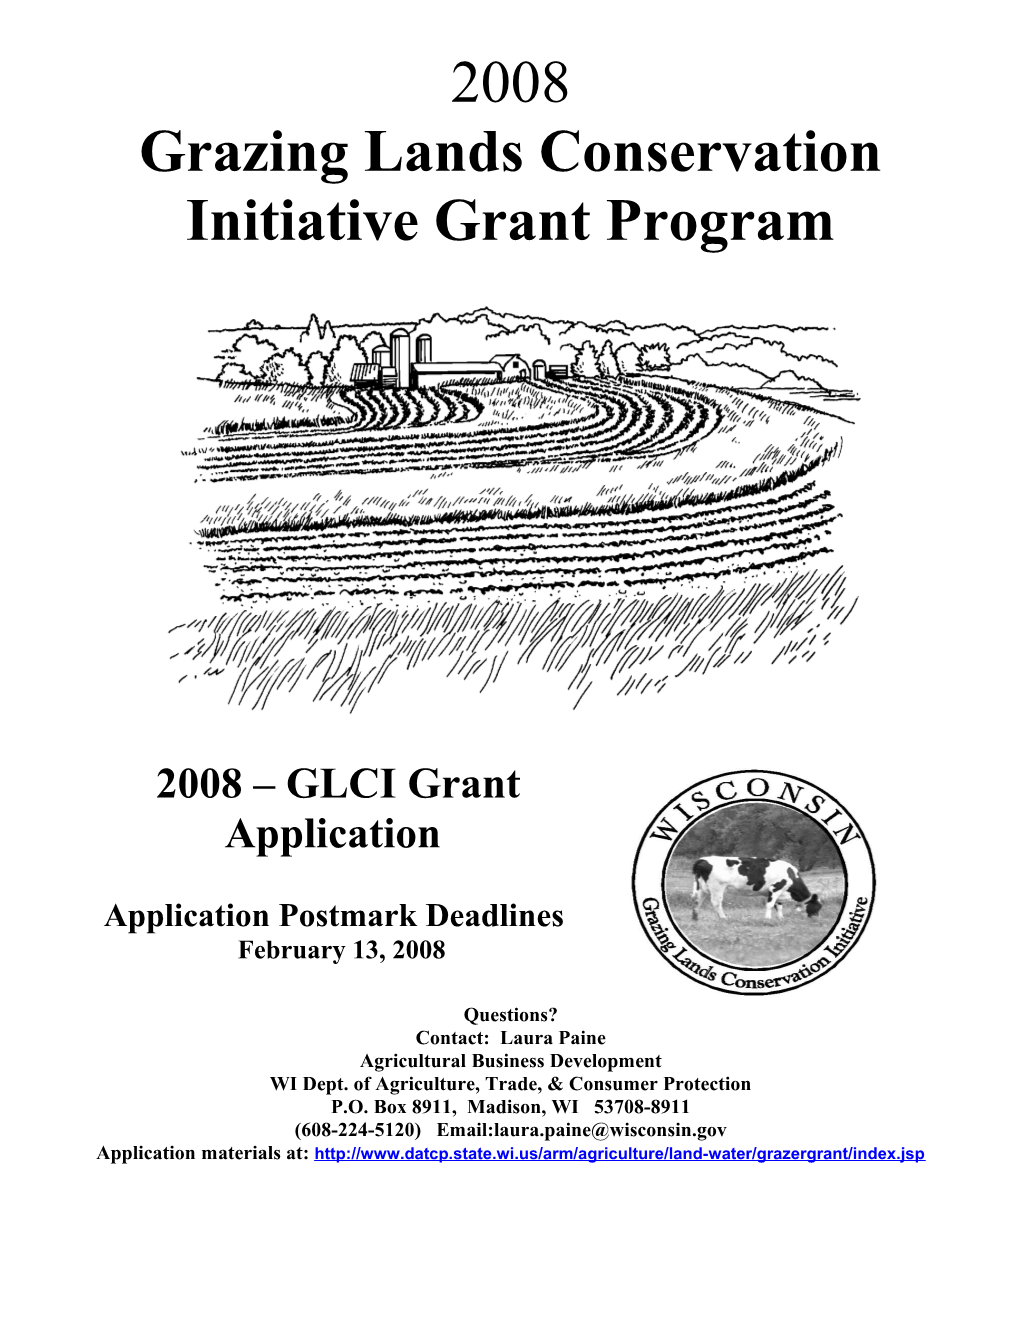 Multi-Agency Land and Water Education and Demonstration Grant Program